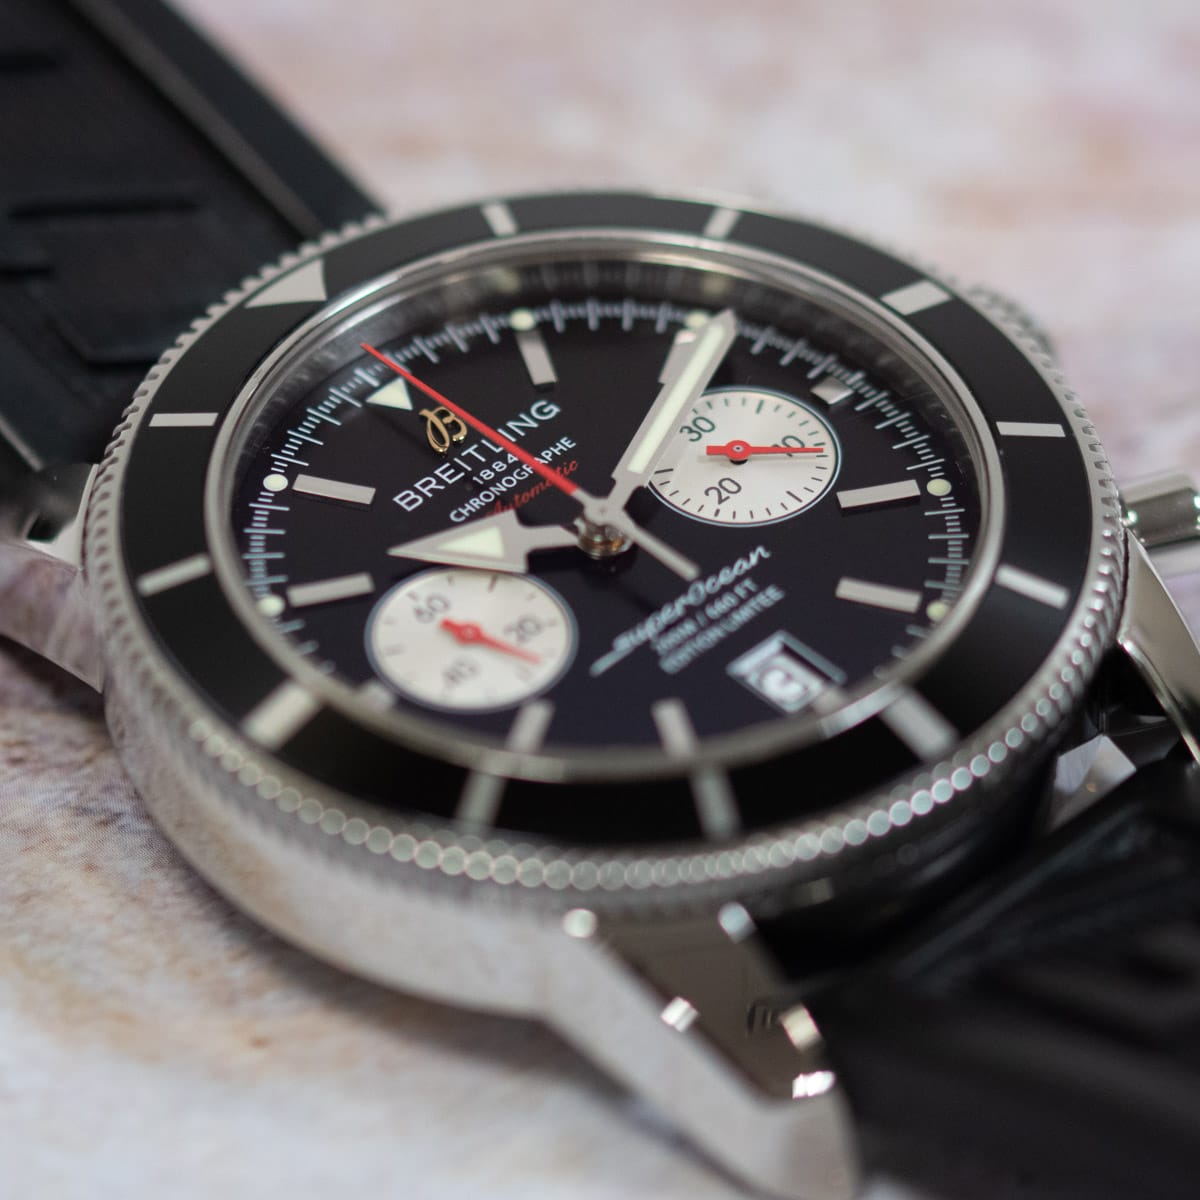 Extra Shot of SuperOcean Heritage Chronograph Limited 125th Anniversary